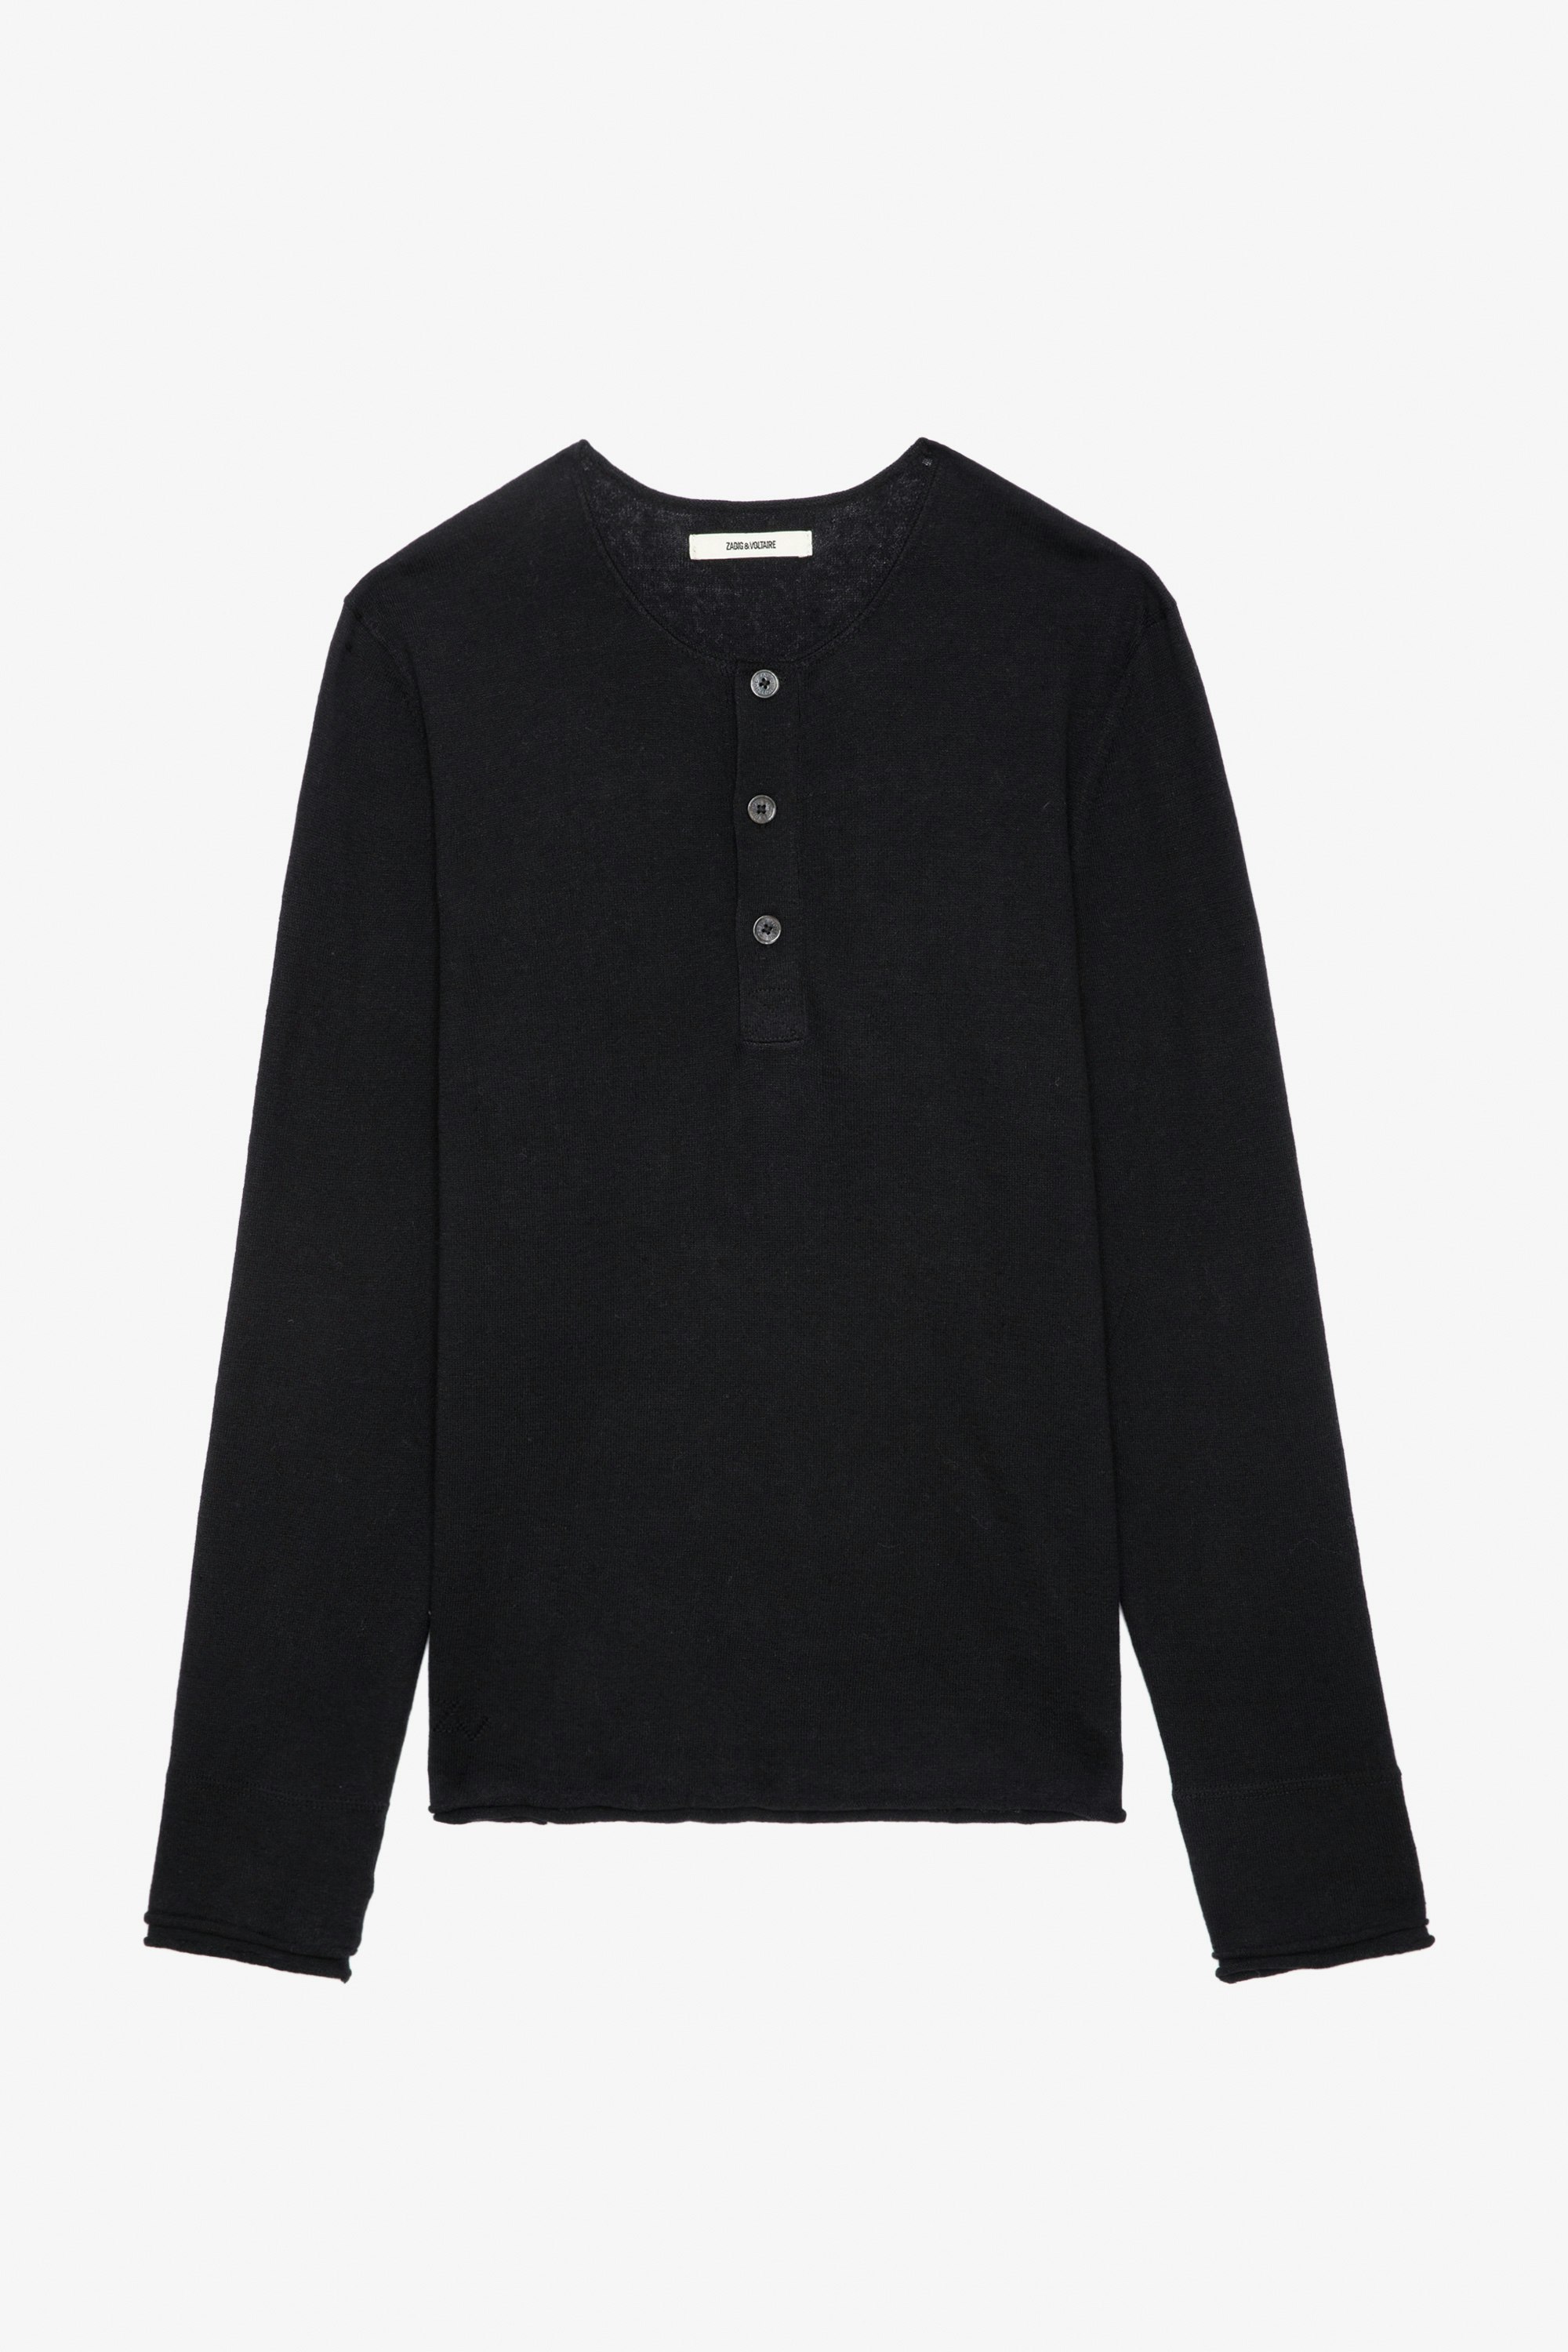 Veiss Jumper - Black long-sleeved jumper with buttoned collar.